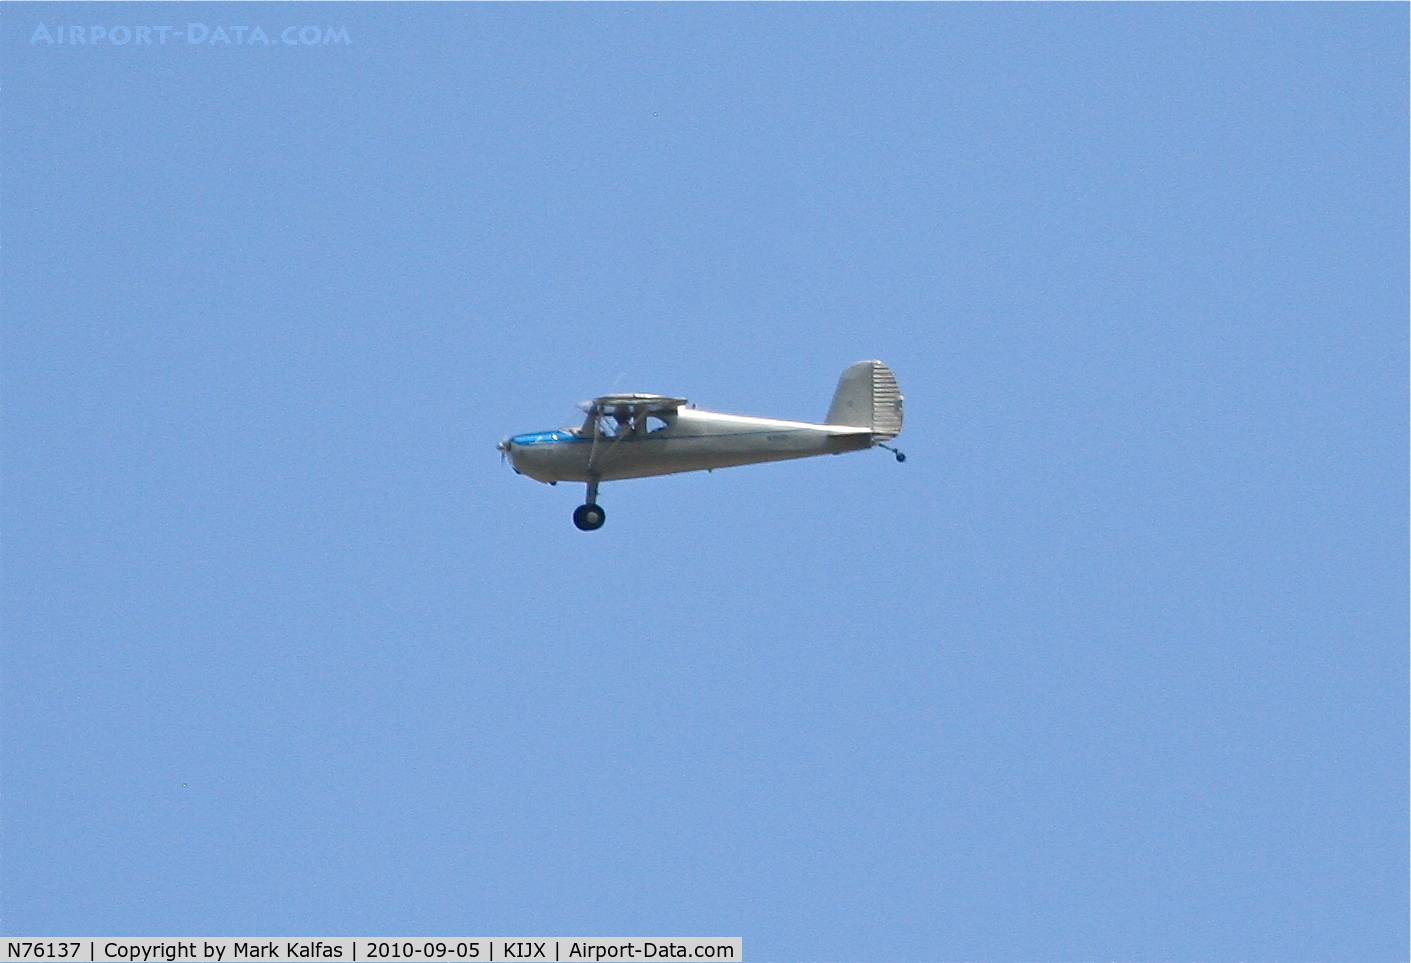 N76137, 1946 Cessna 120 C/N 10534, Cessna 120, N76137 circling over Illinois College's Green Athletic Field in Jacksonville,Illinois during a contest between IC and Millikin.